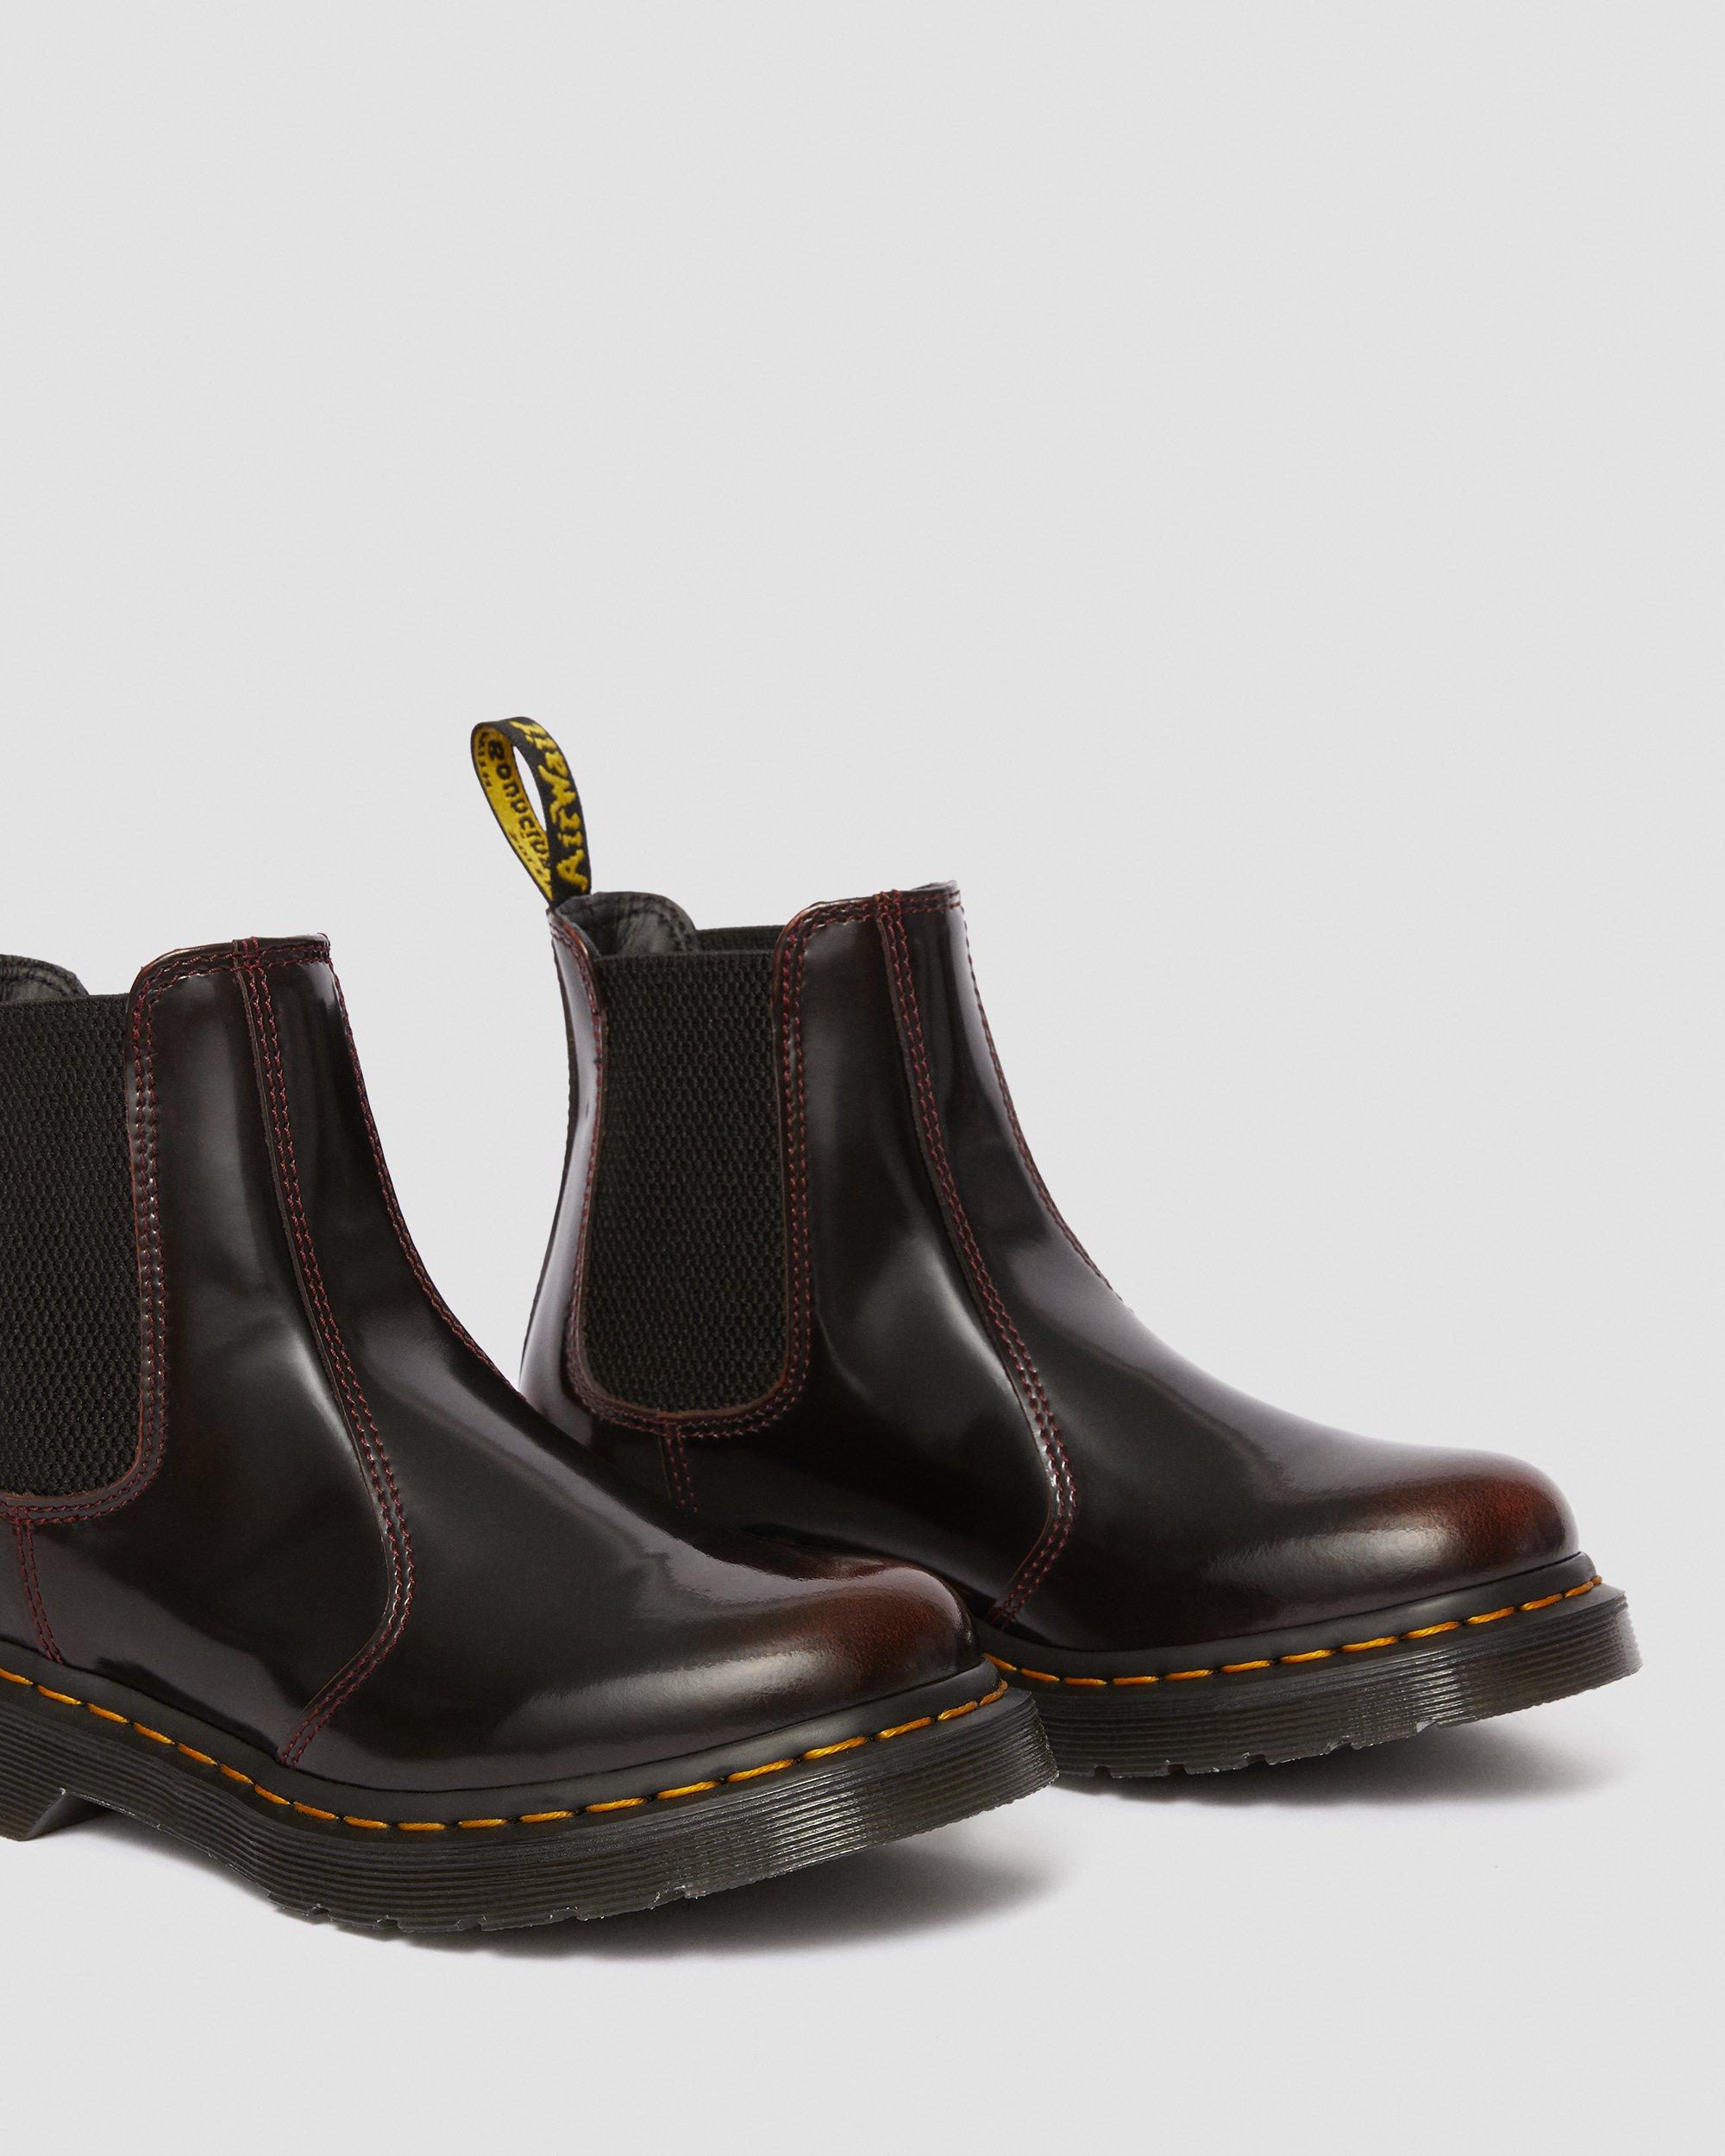 2976 Women's Arcadia Leather Chelsea Boots in Cherry Red | Dr. Martens